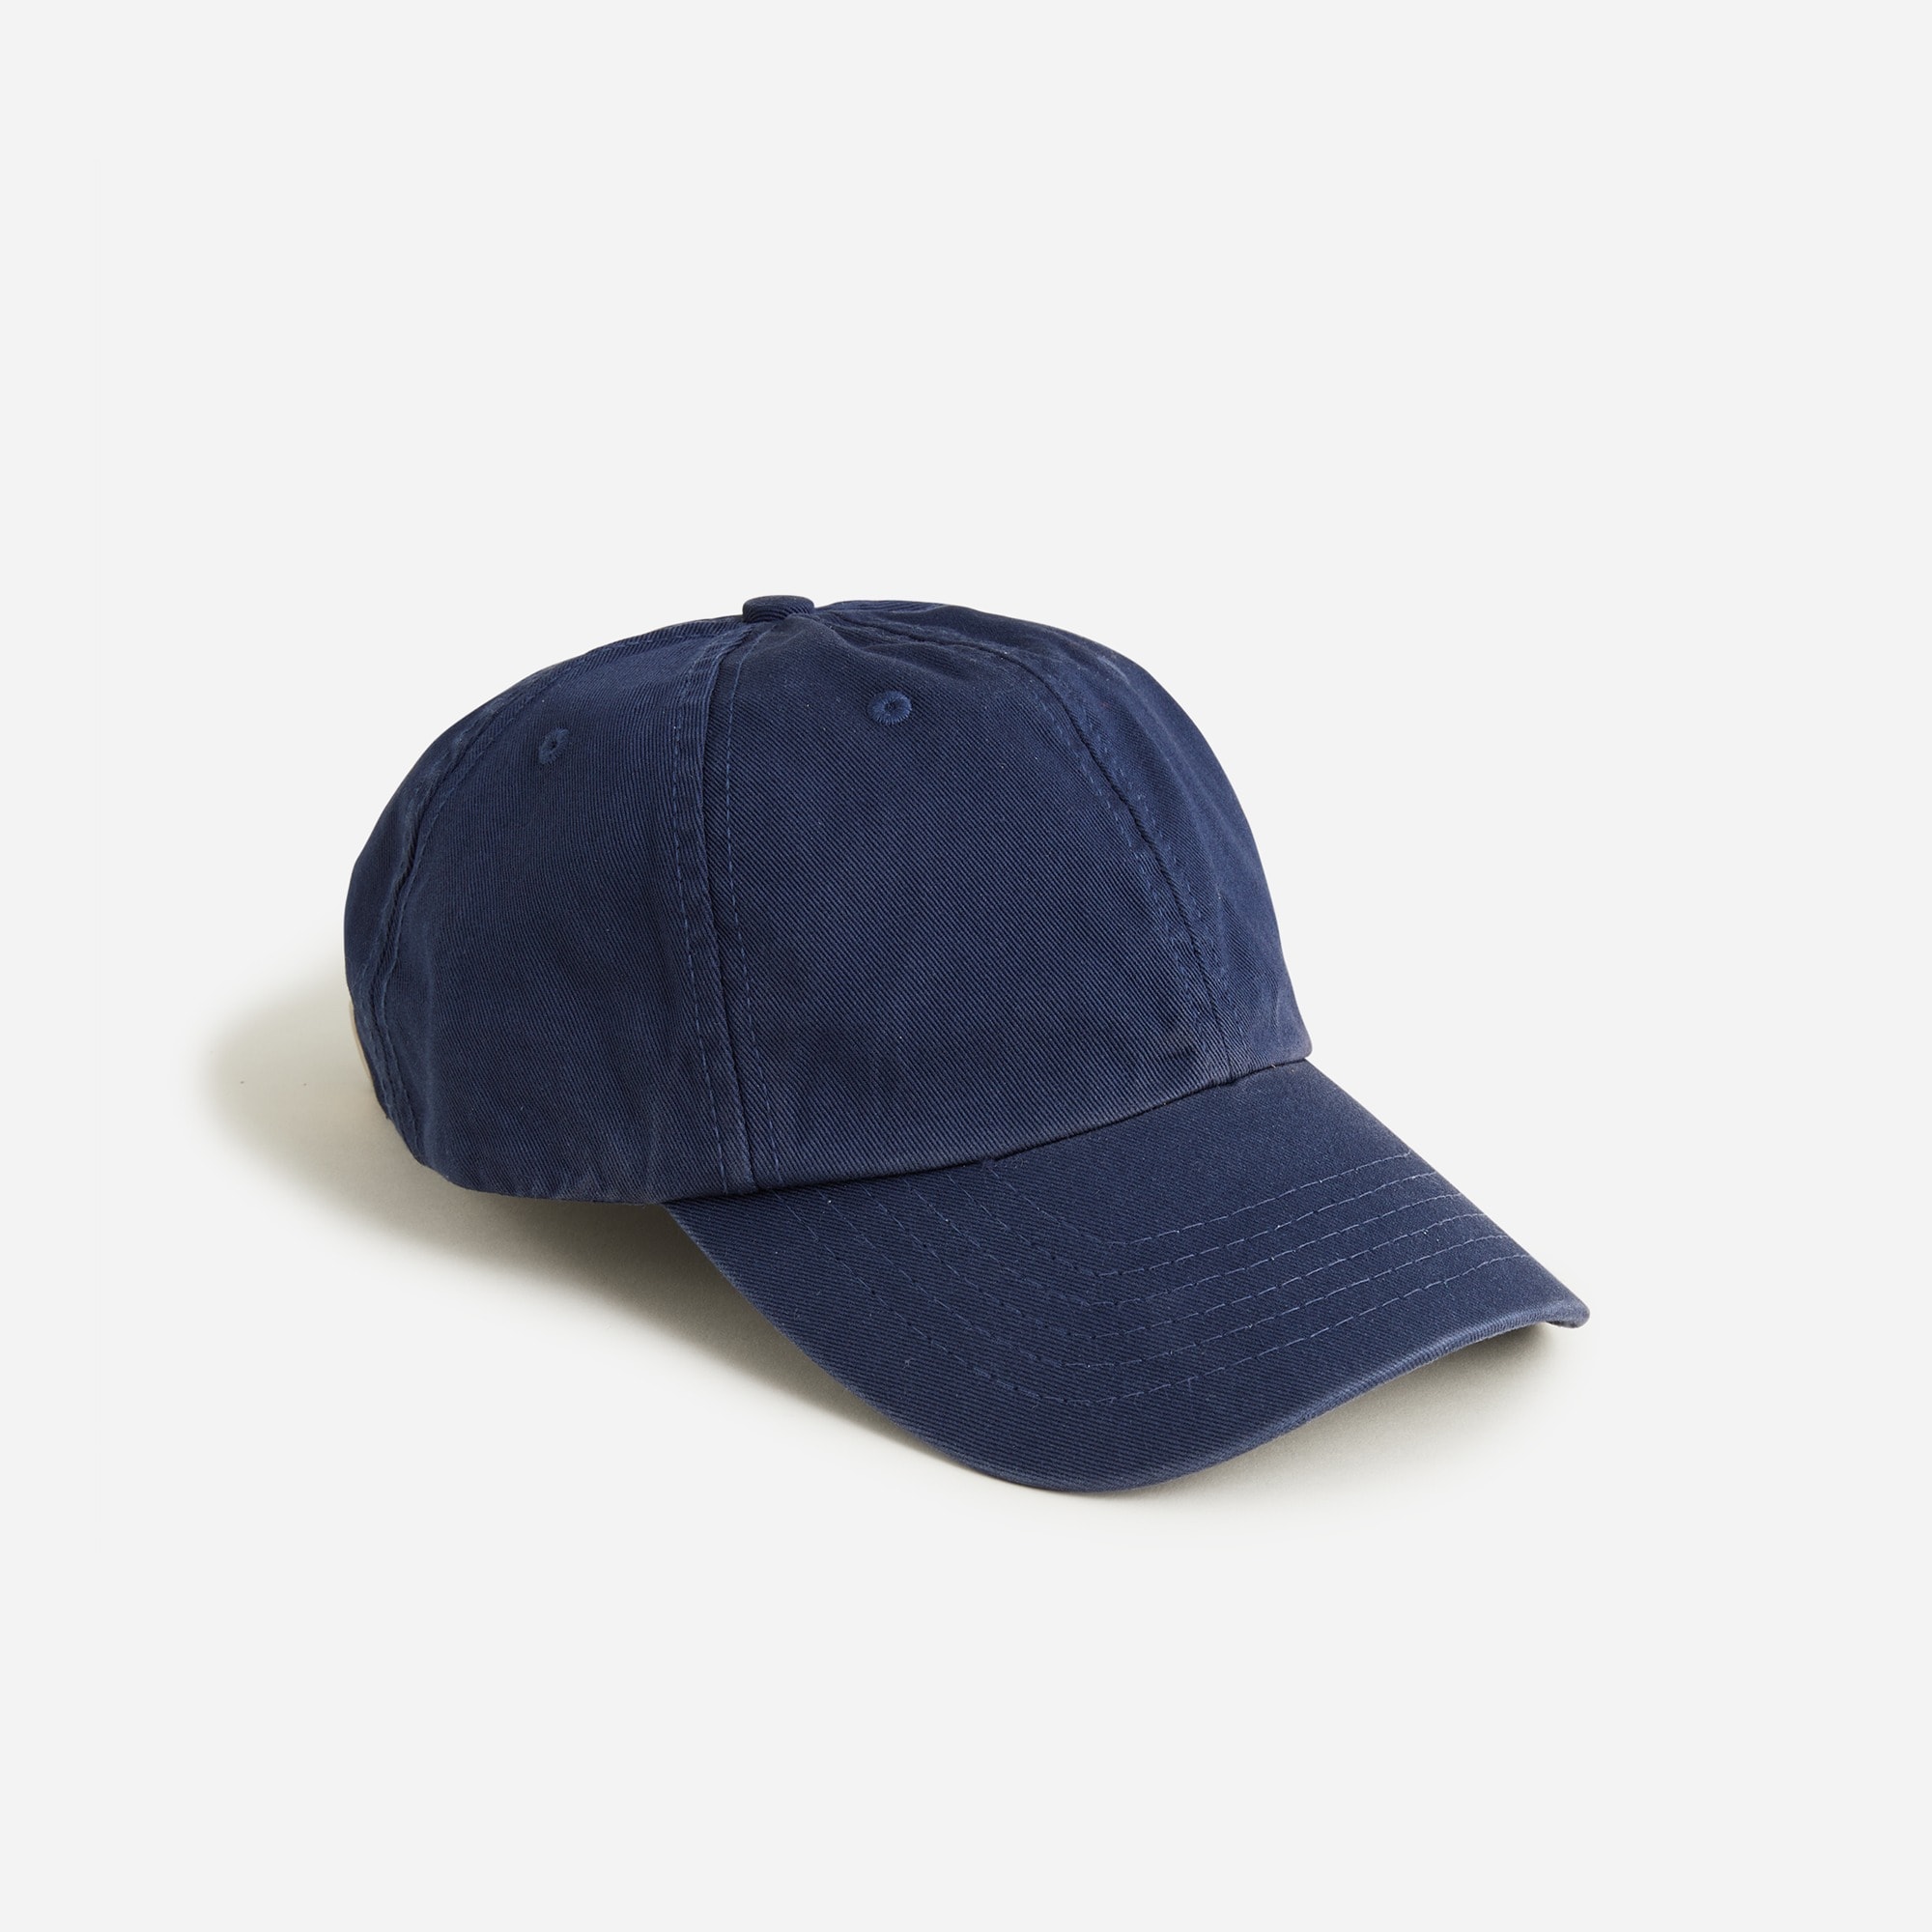 mens Made-in-the-USA garment-dyed twill baseball cap